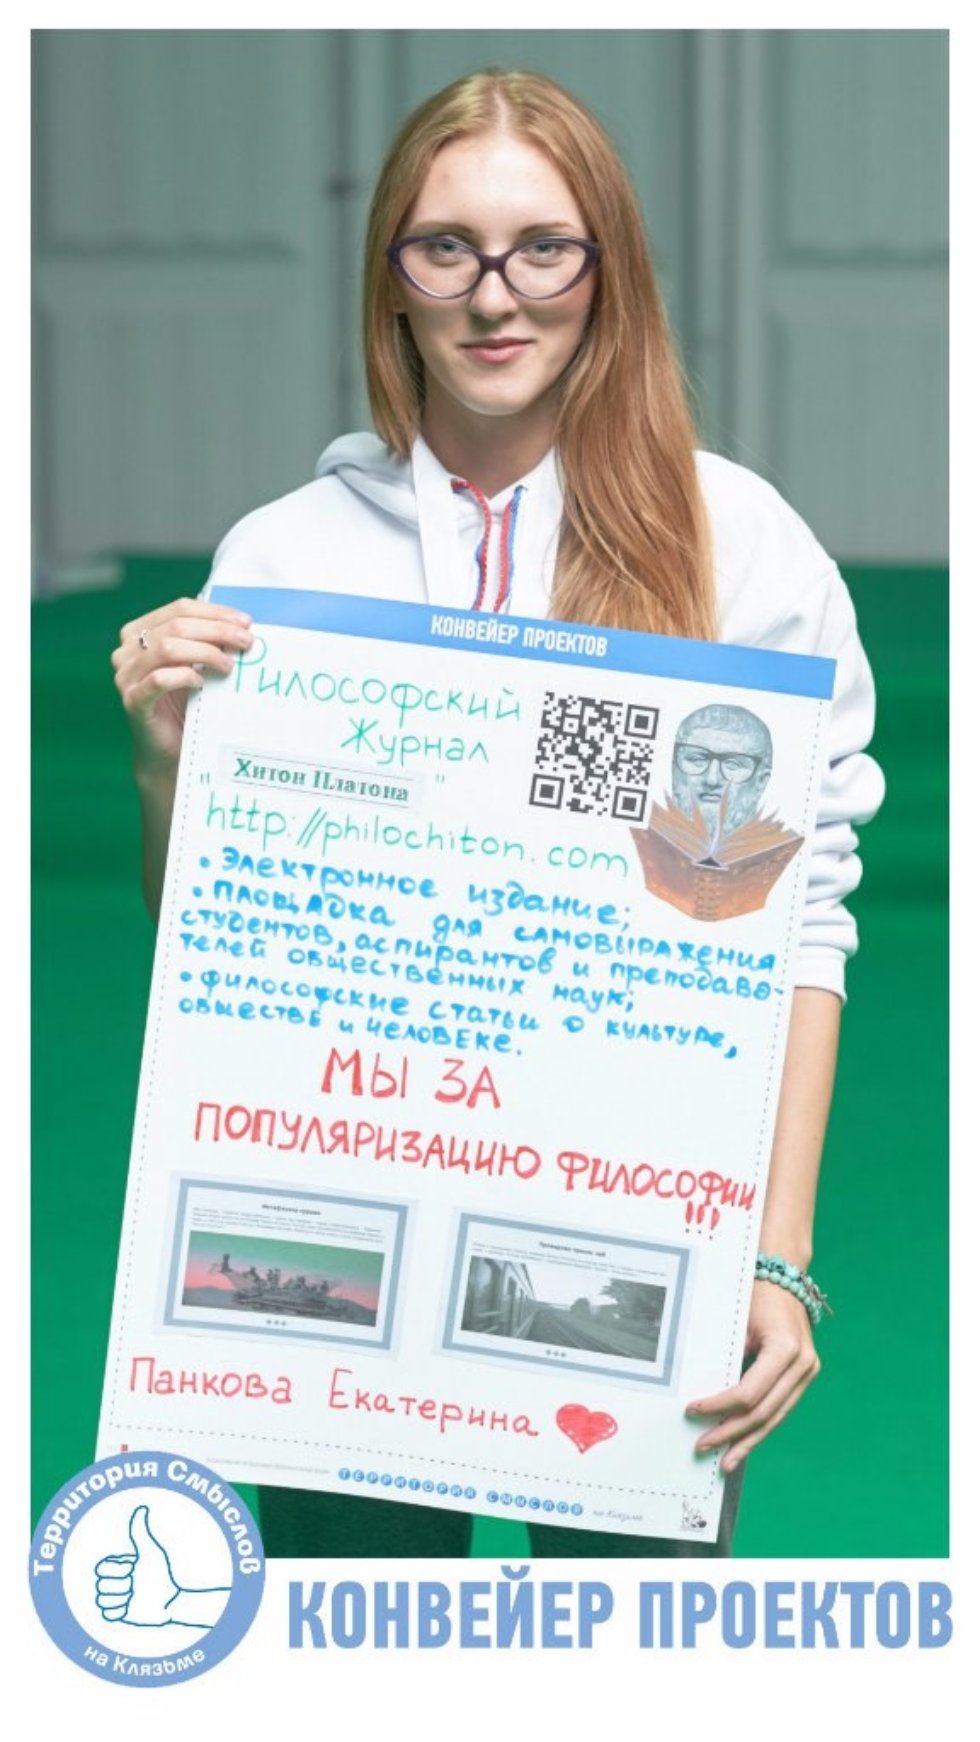 Philosophical journal 'Hiton Platona' won the grant of All-Russian competition of youth projects!